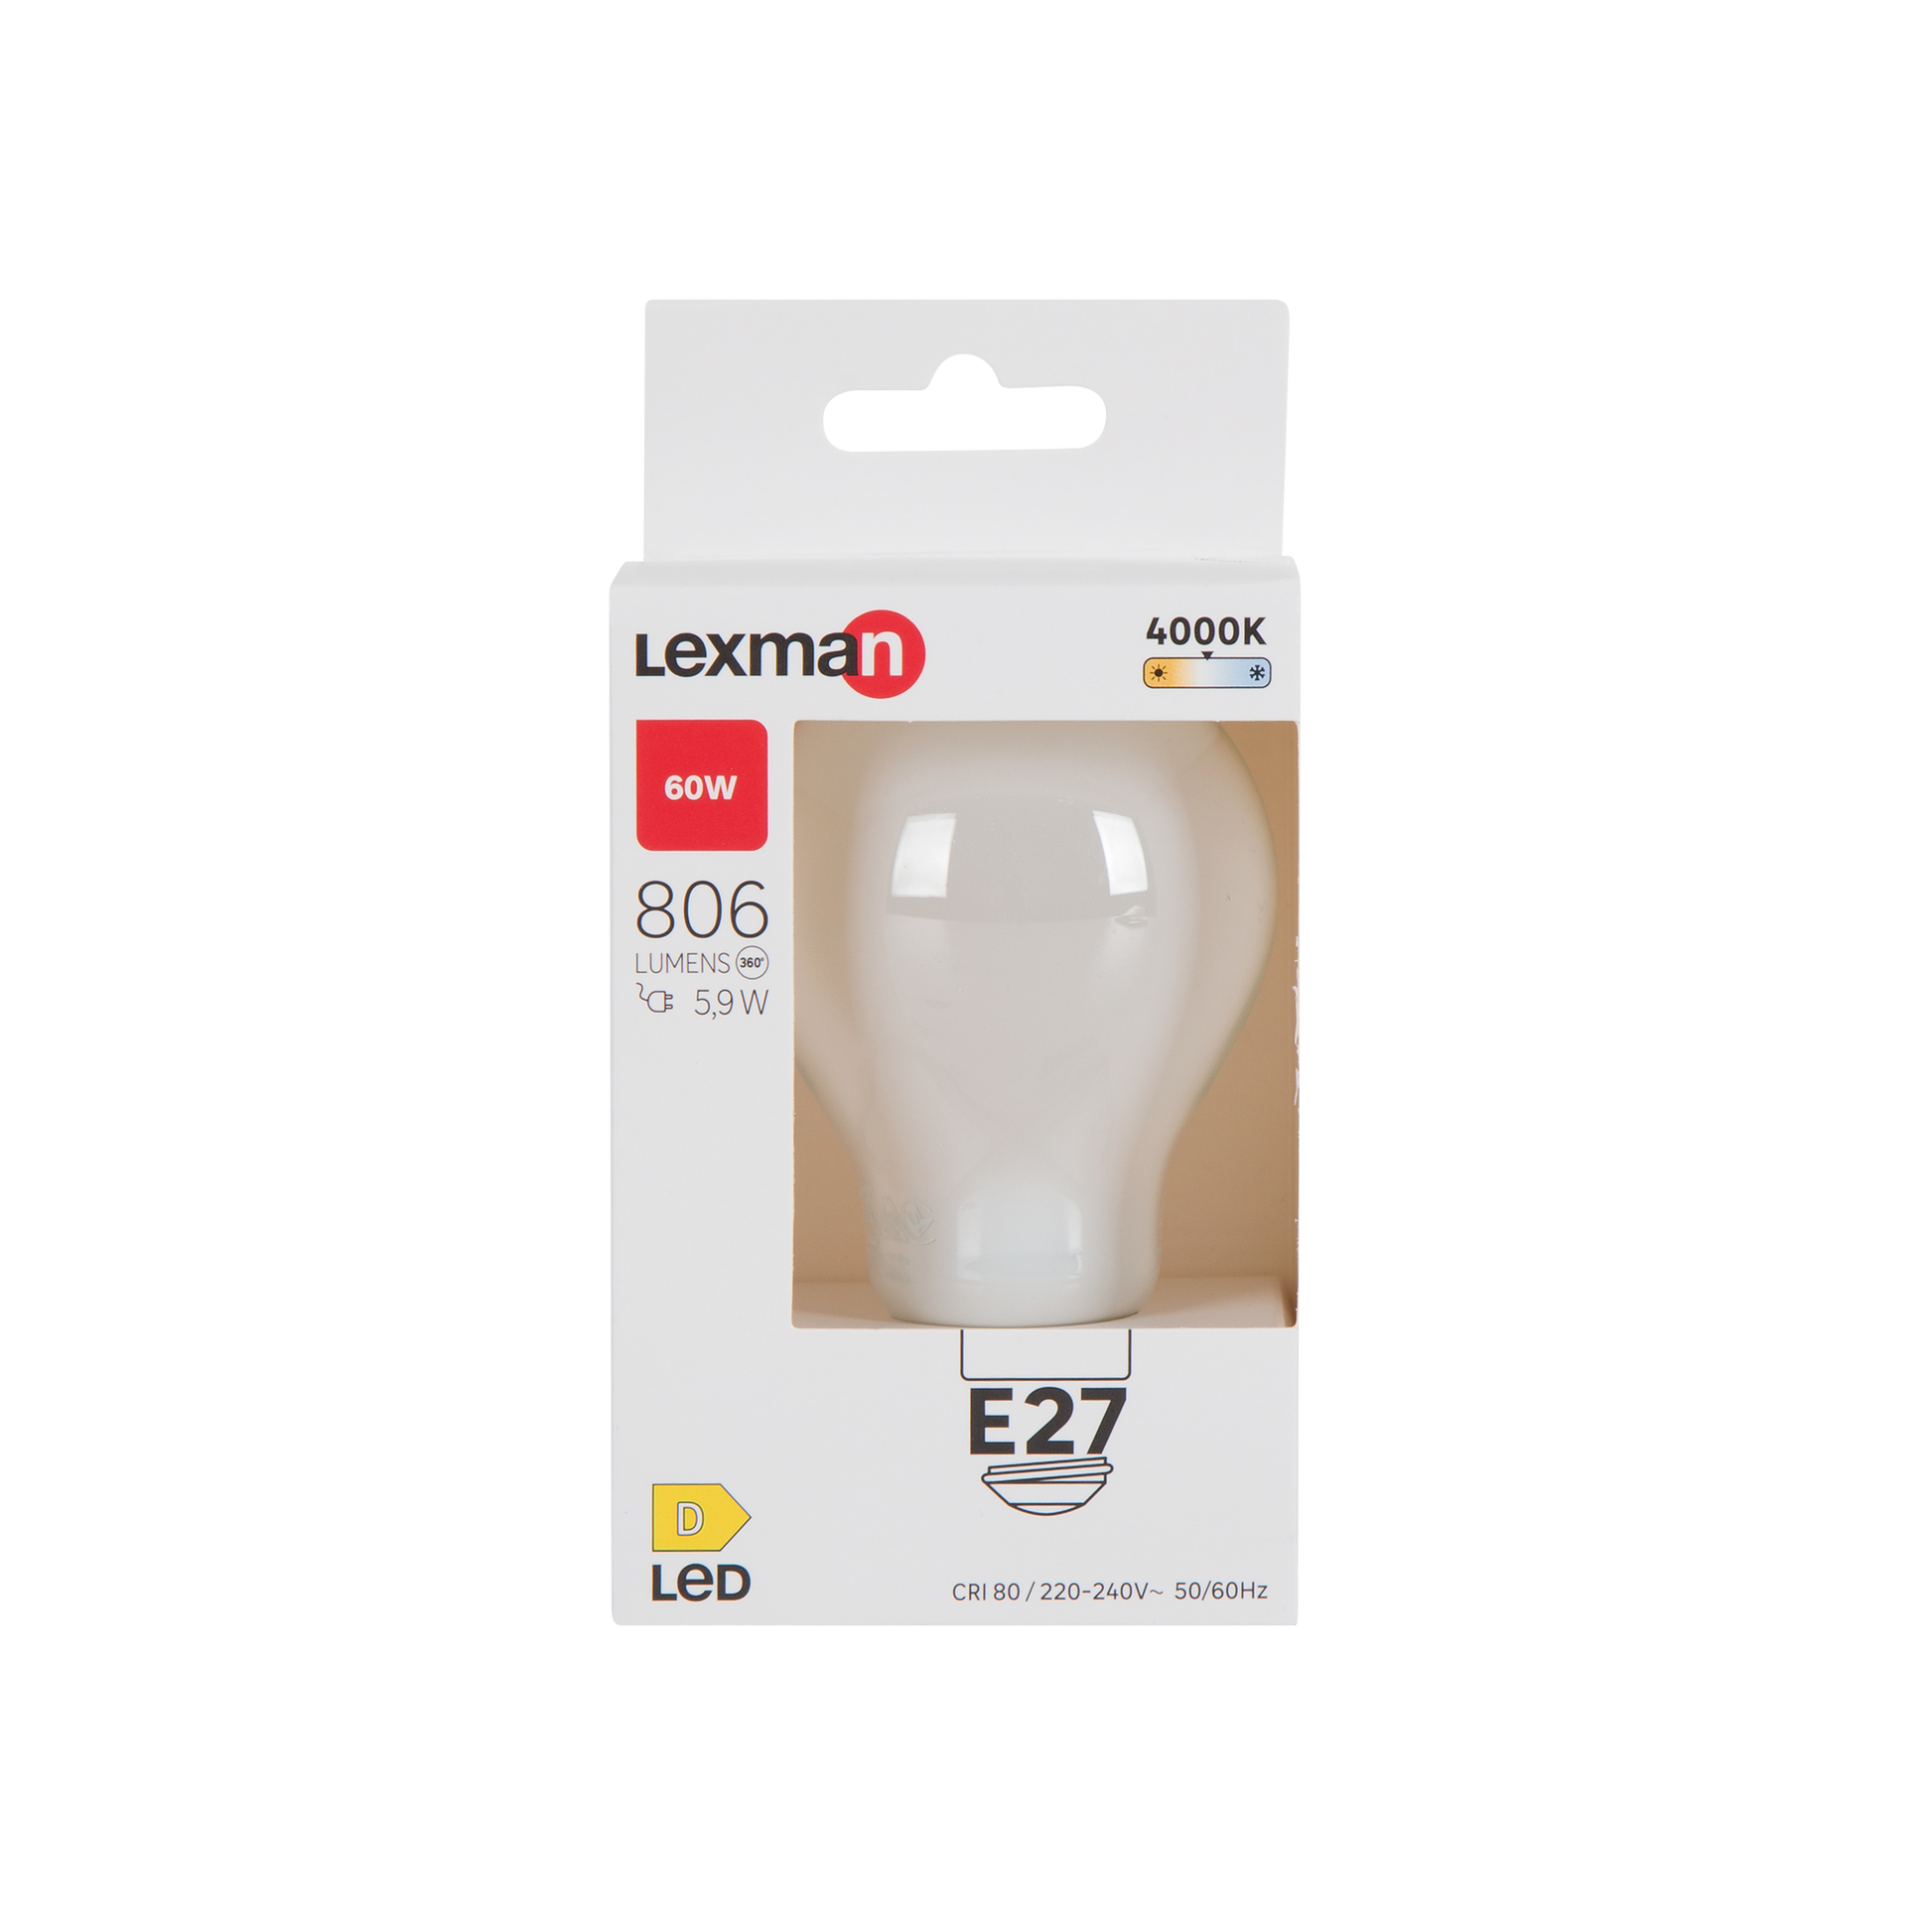 LED BULB E27=60W FROSTED DROP NATURAL LIGHT